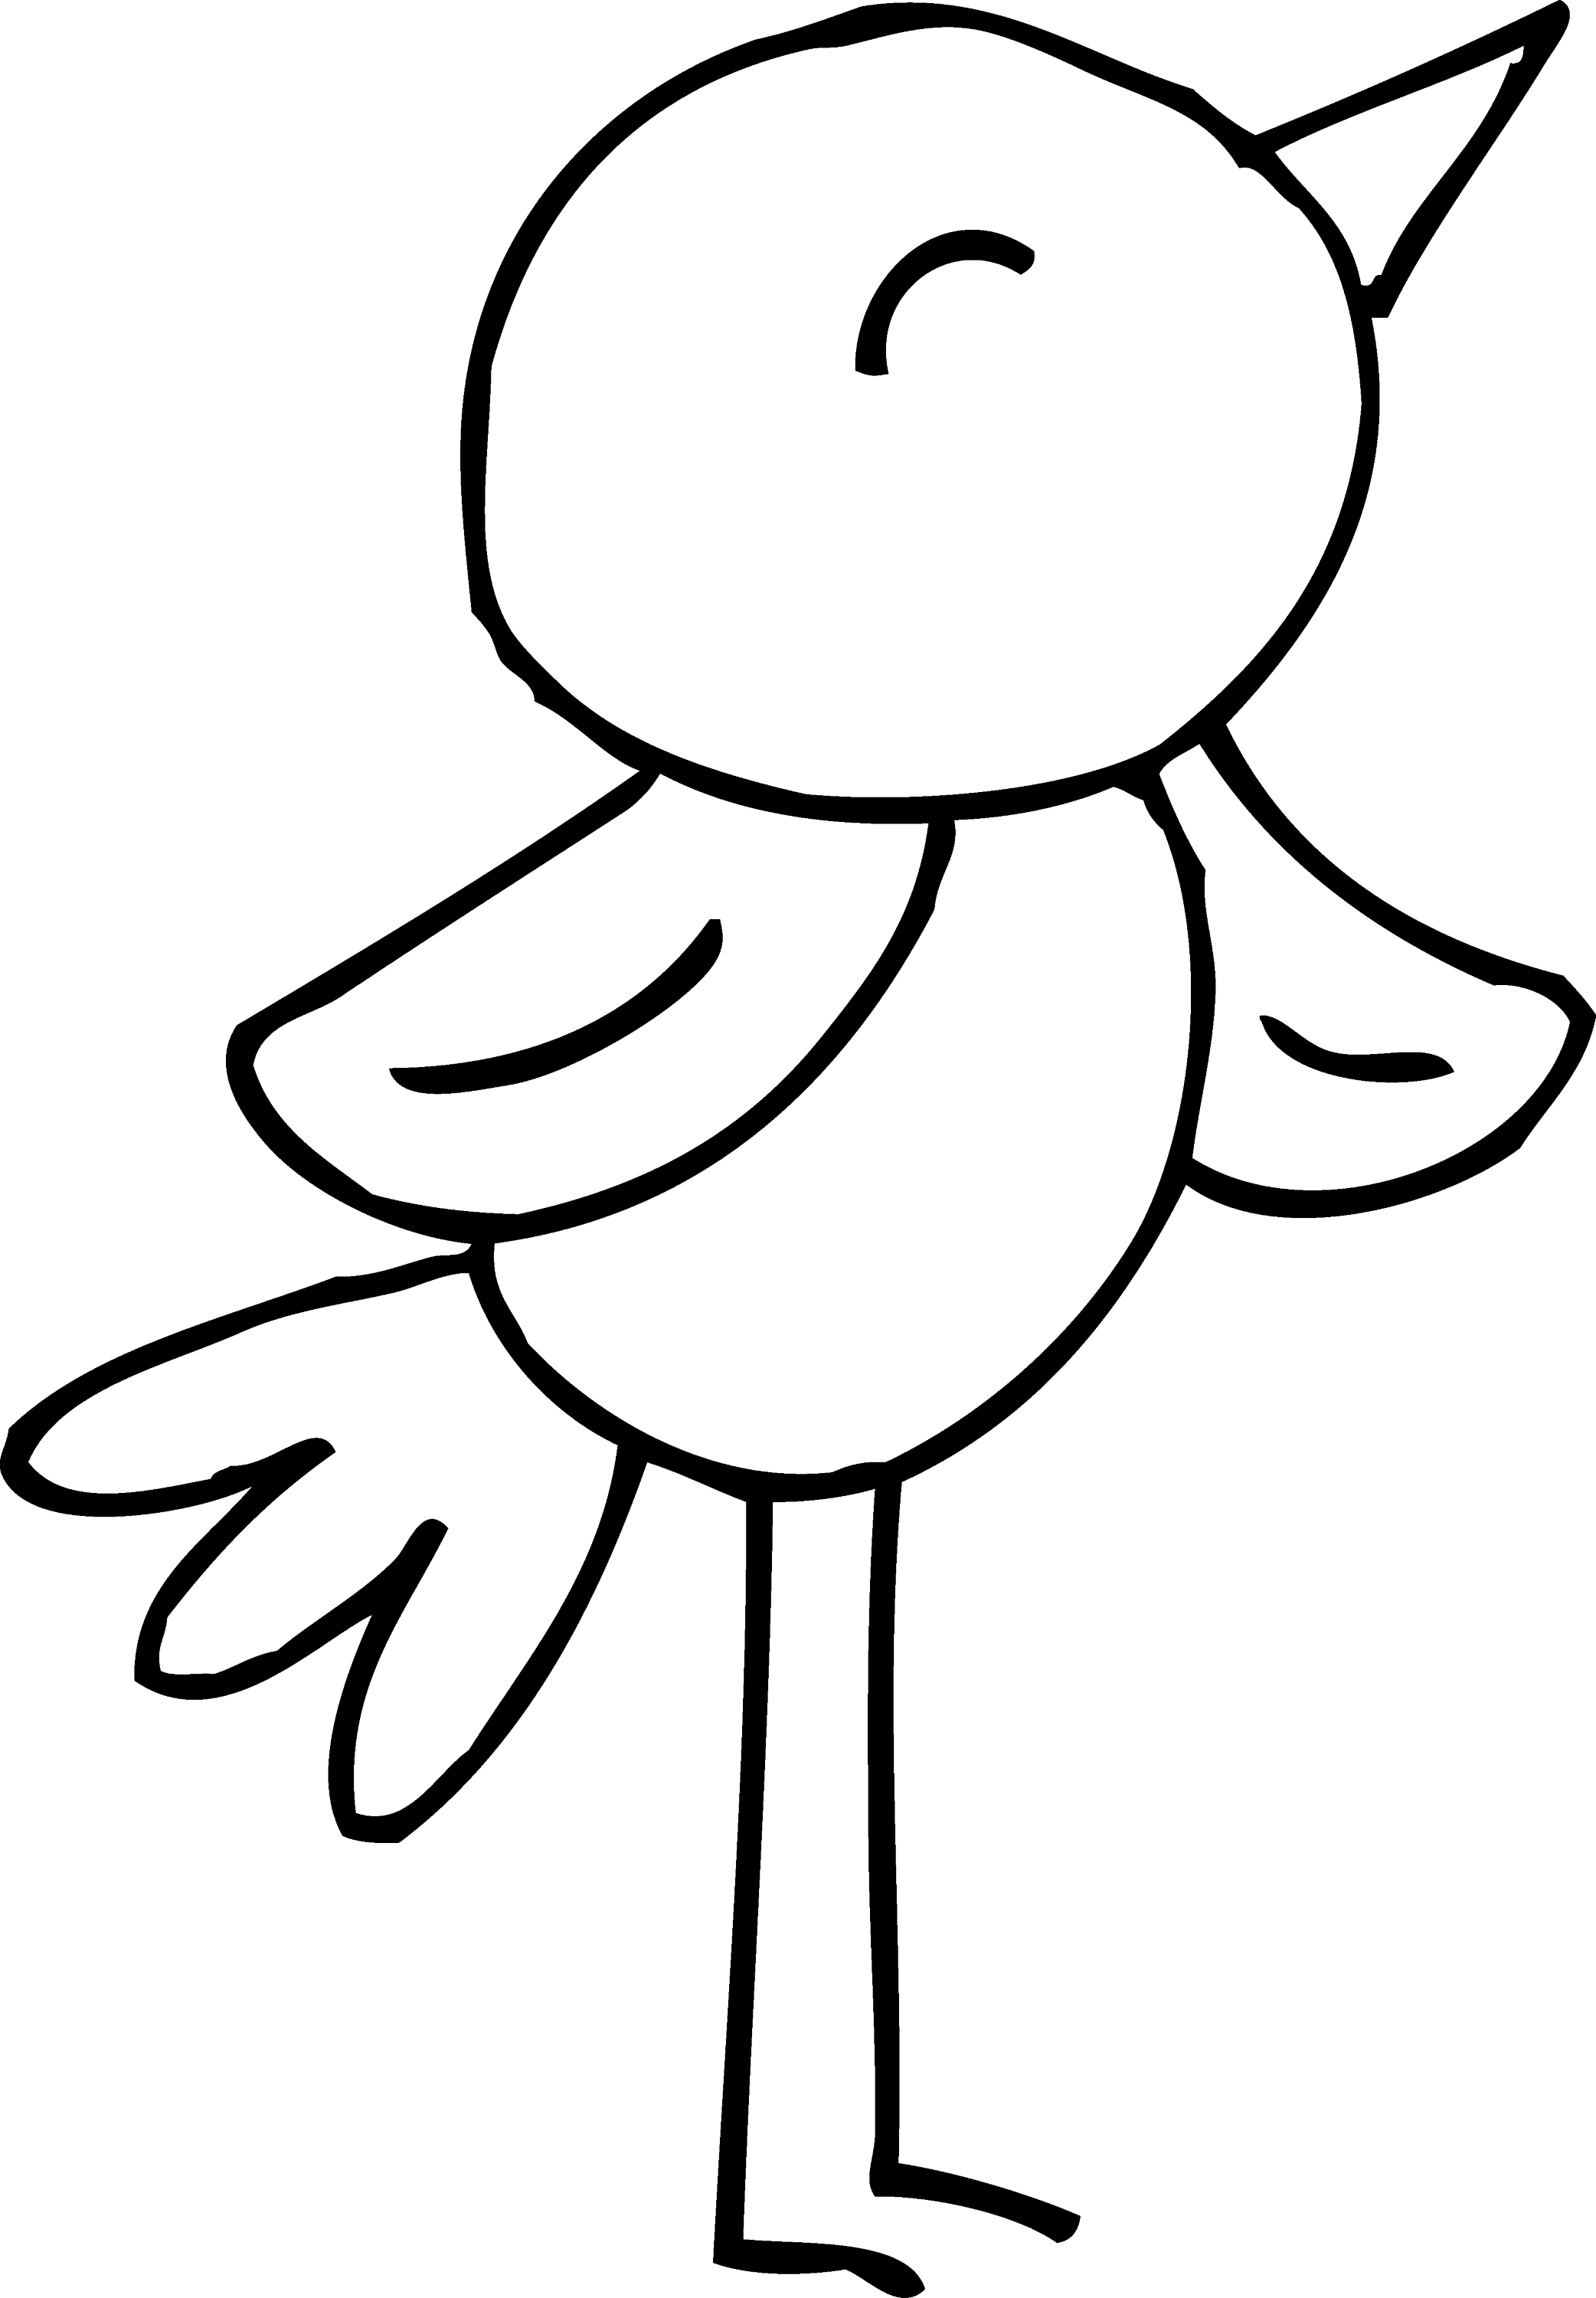 Download Spring Bird Coloring Page - Free Clip Art